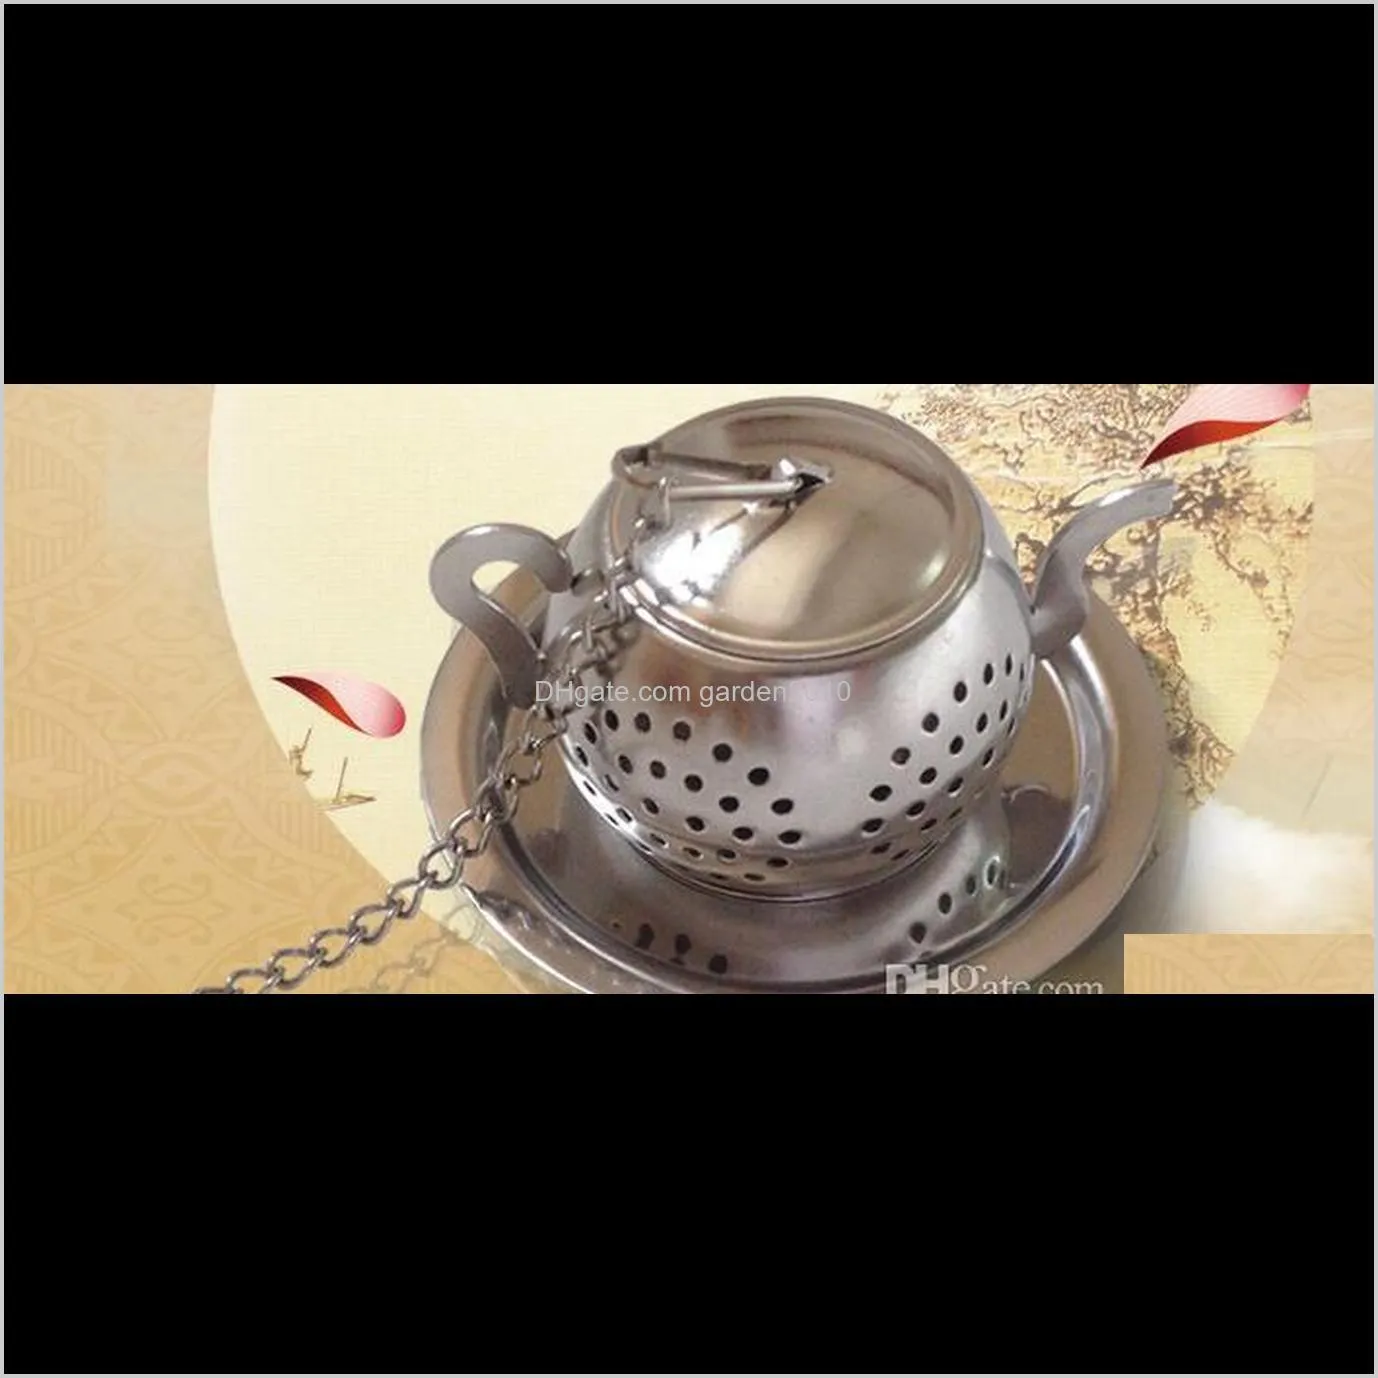 home kitchen bar tea tool stainless steel loose teapot shape tea infuser with tray lovely convenient spice drinking strainer herbal